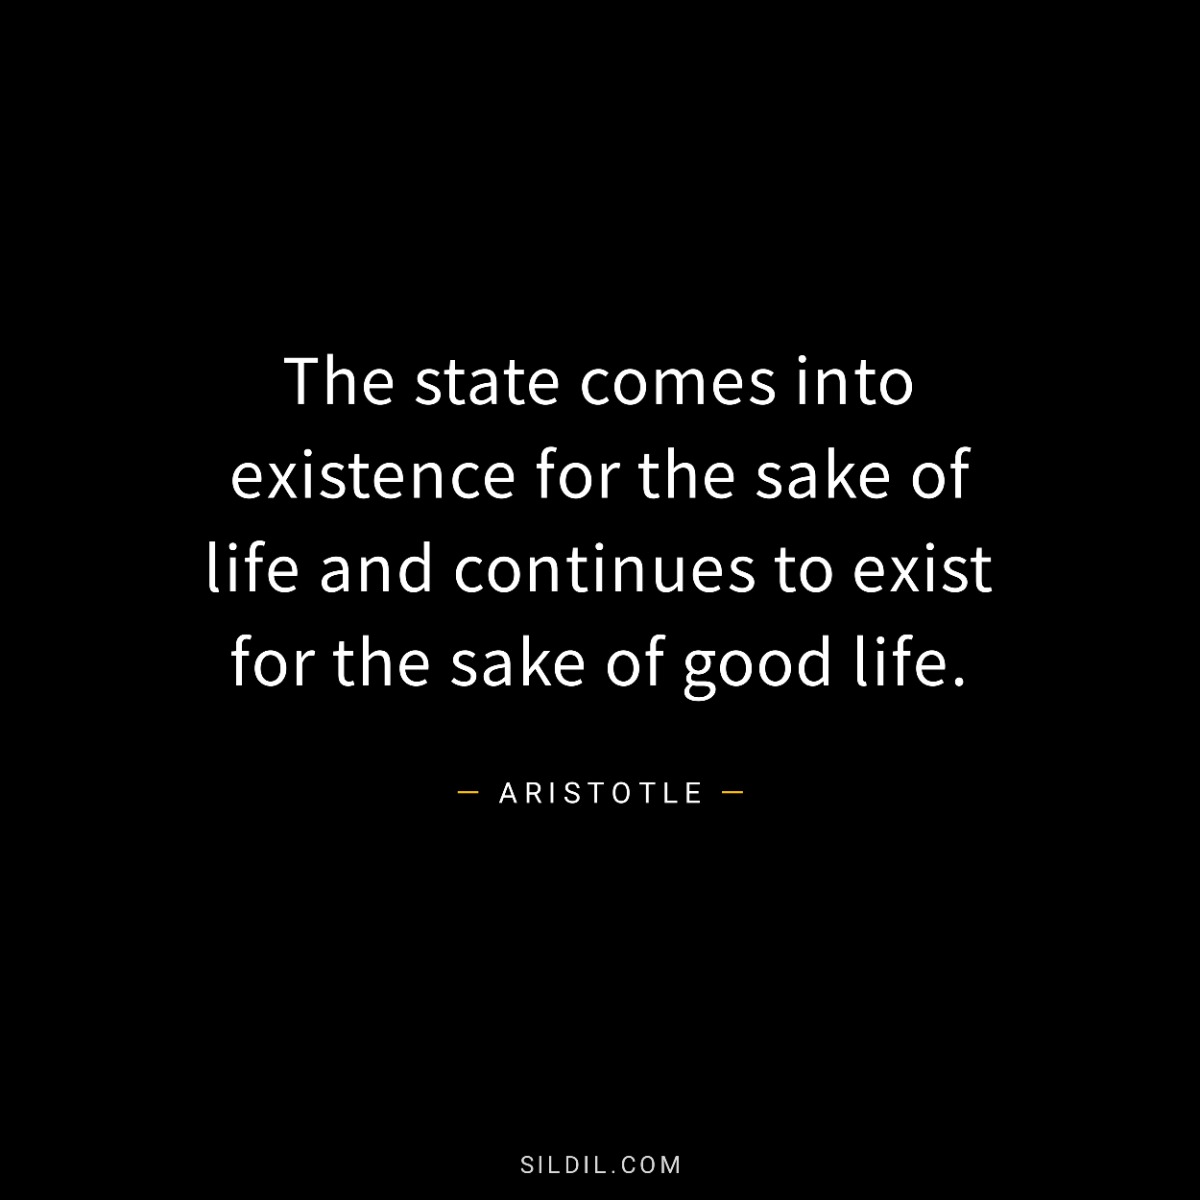 The state comes into existence for the sake of life and continues to exist for the sake of good life.